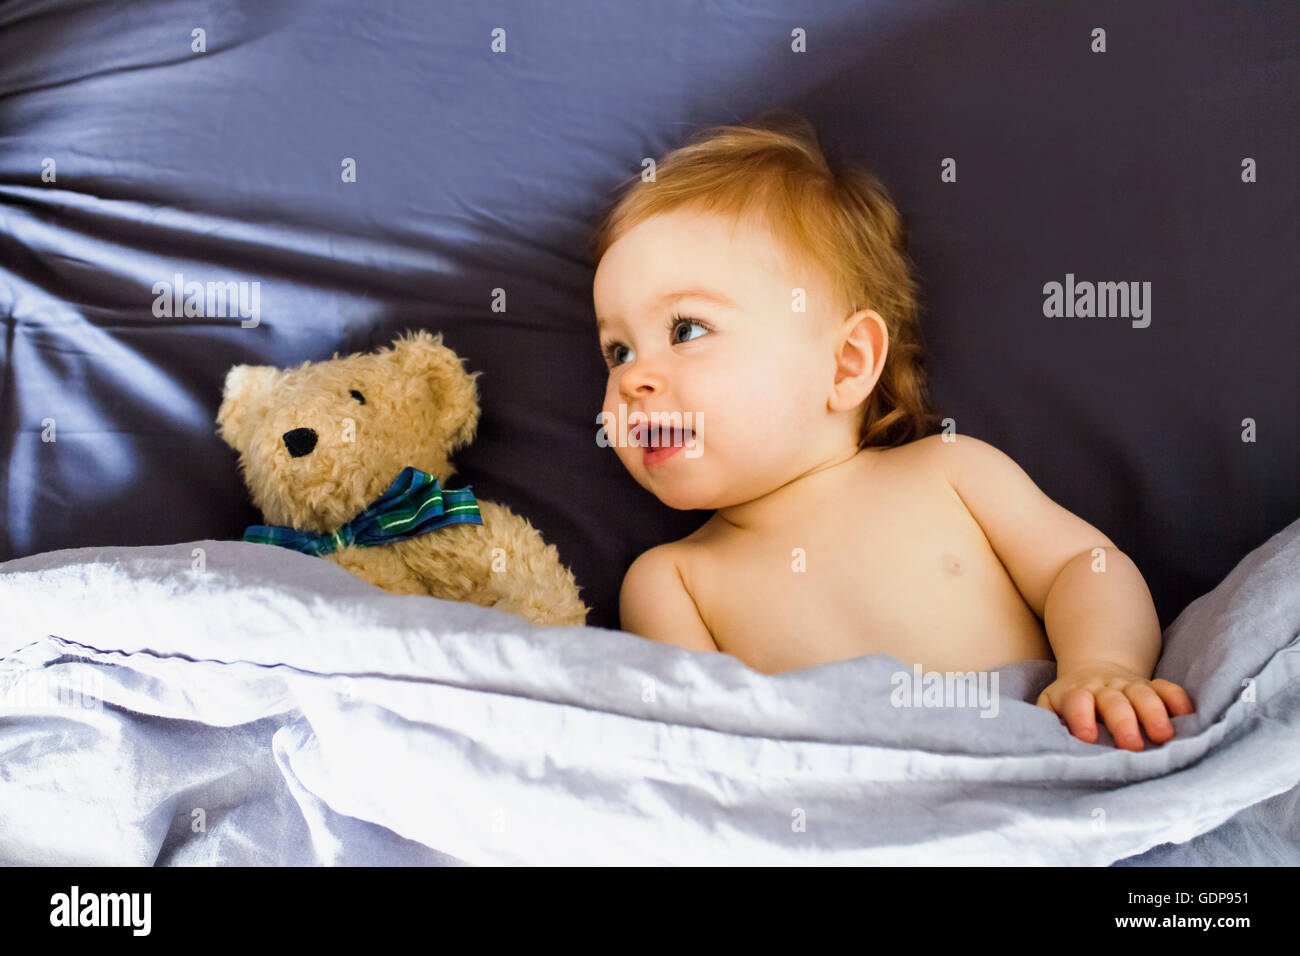 Baby Girl lying in bed with teddy bear Banque D'Images